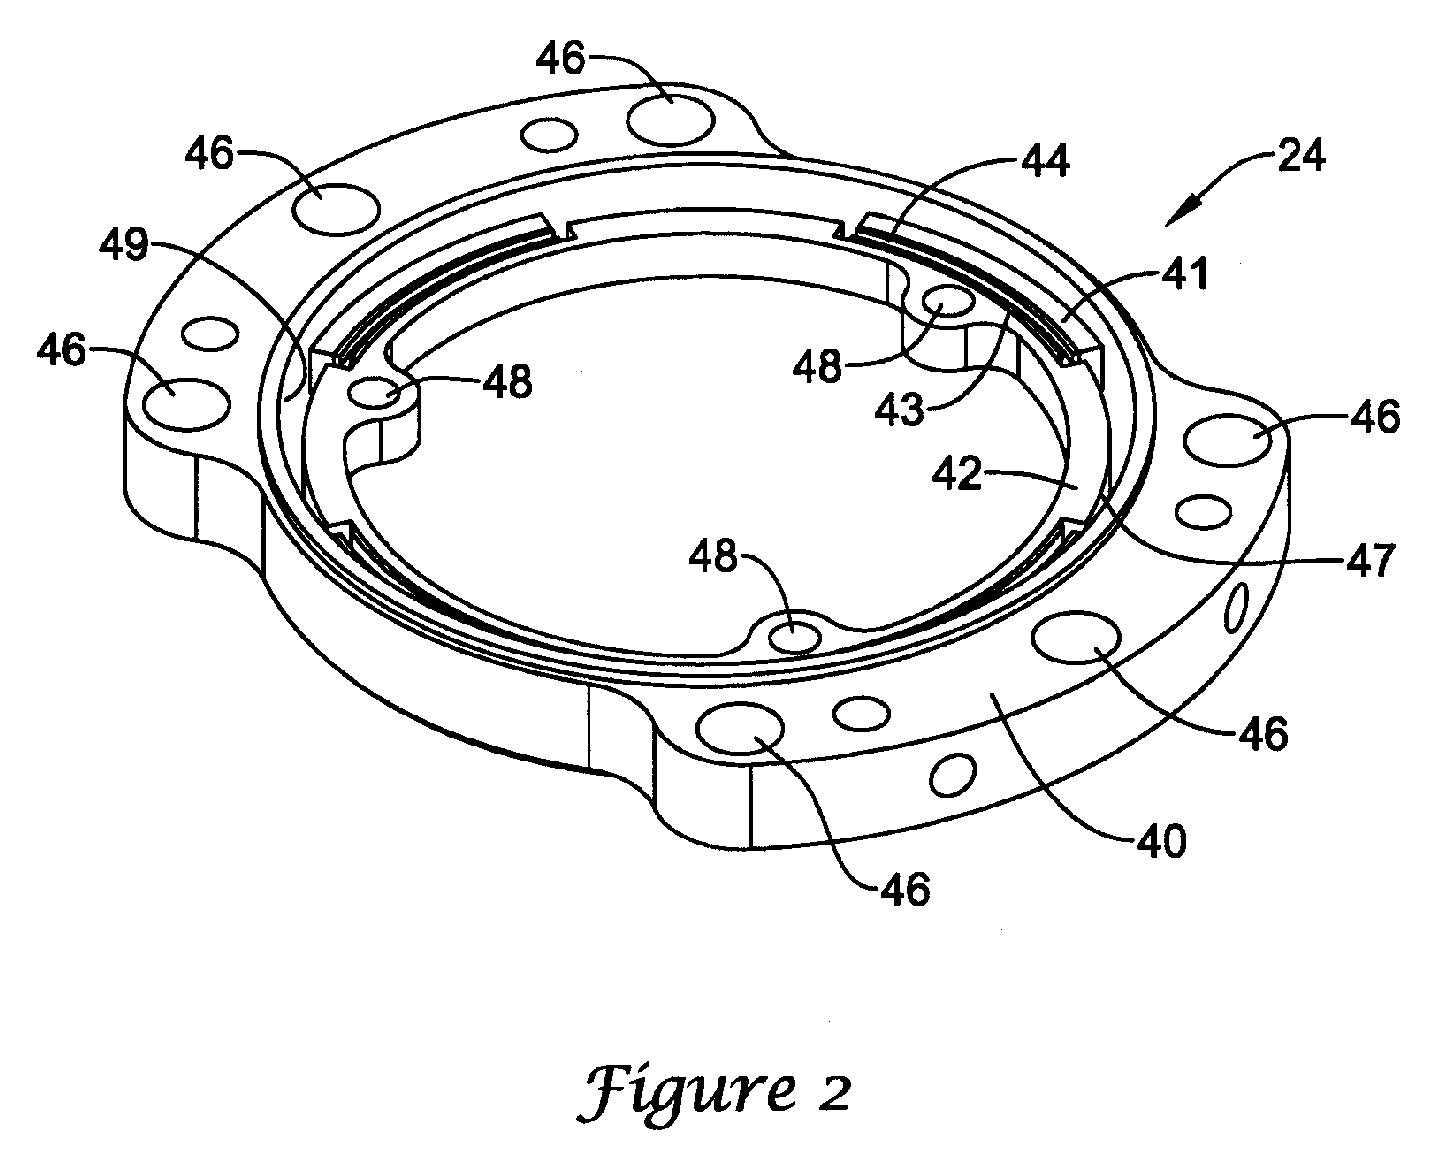 Isolation system for an inertial measurement unit